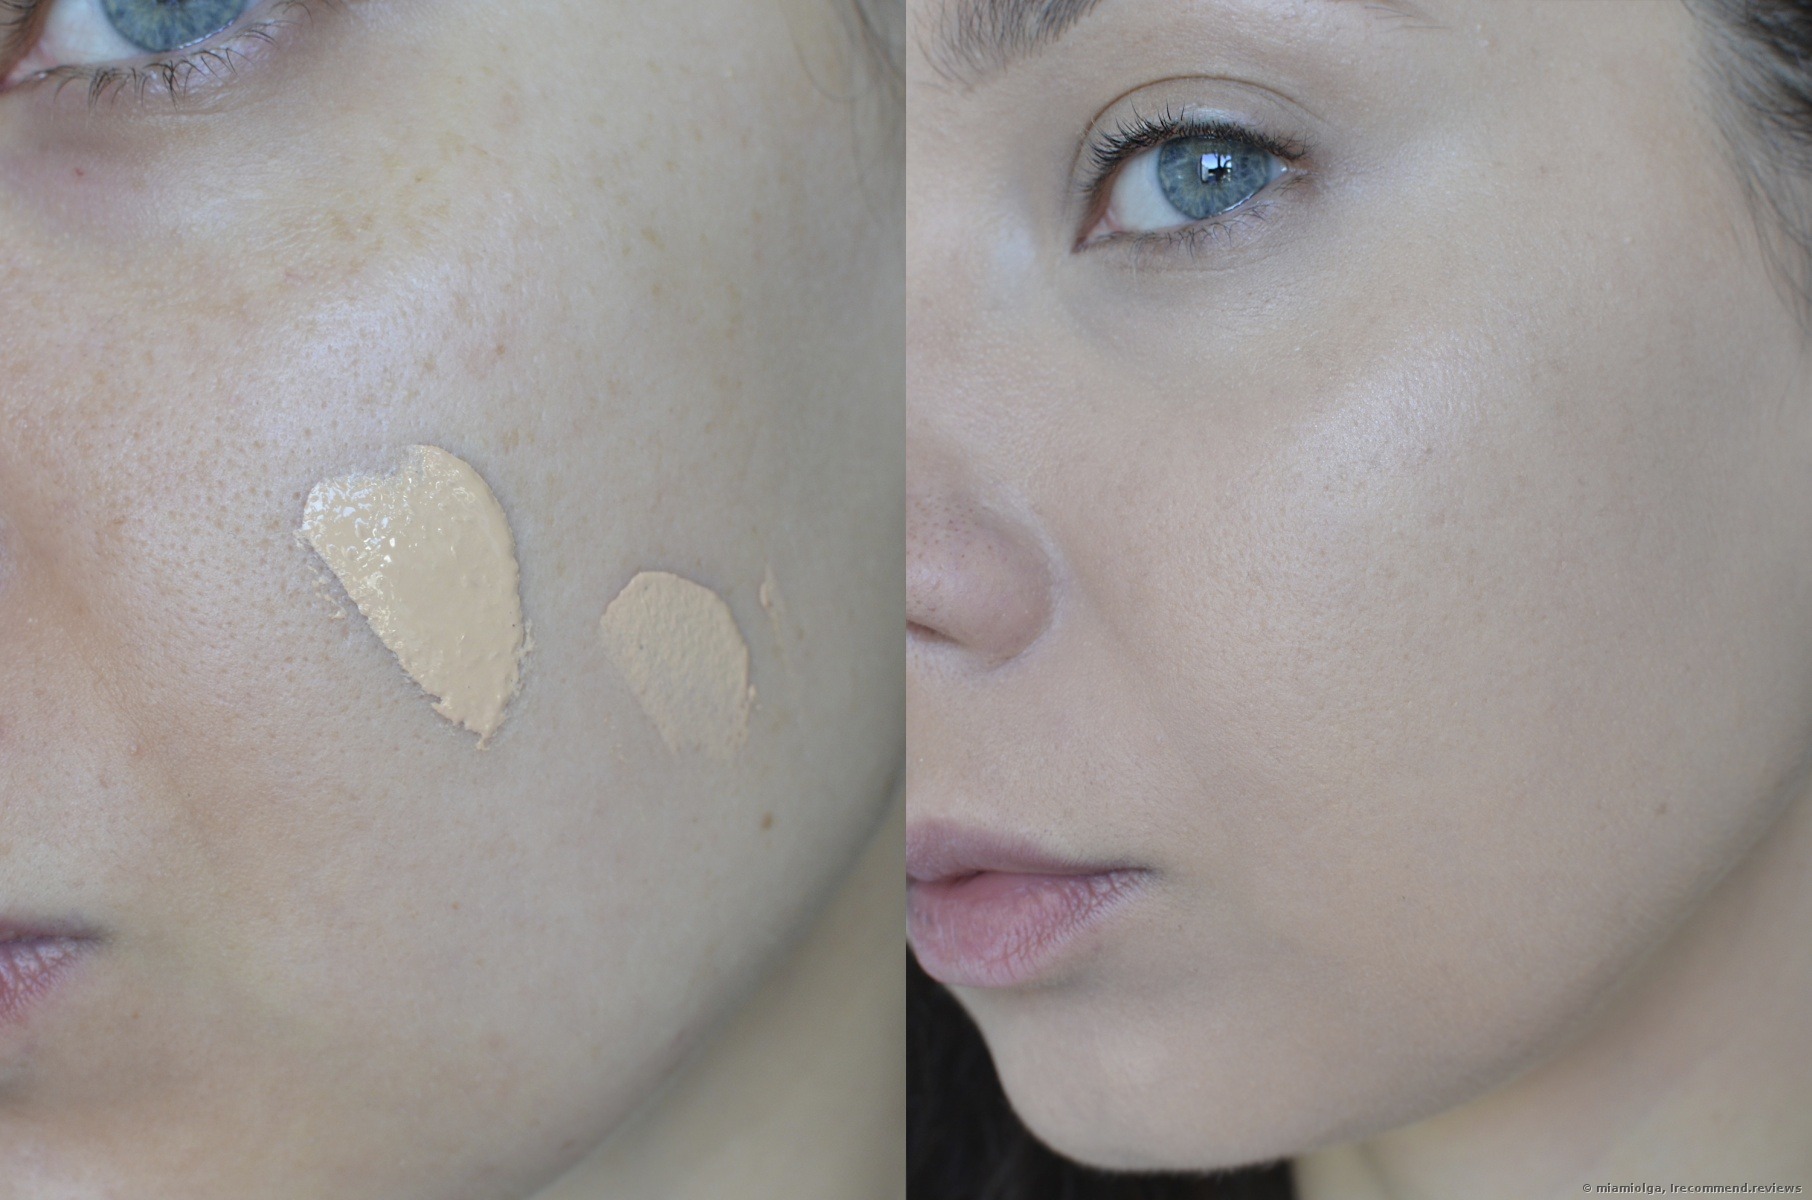 diorskin forever foundation review